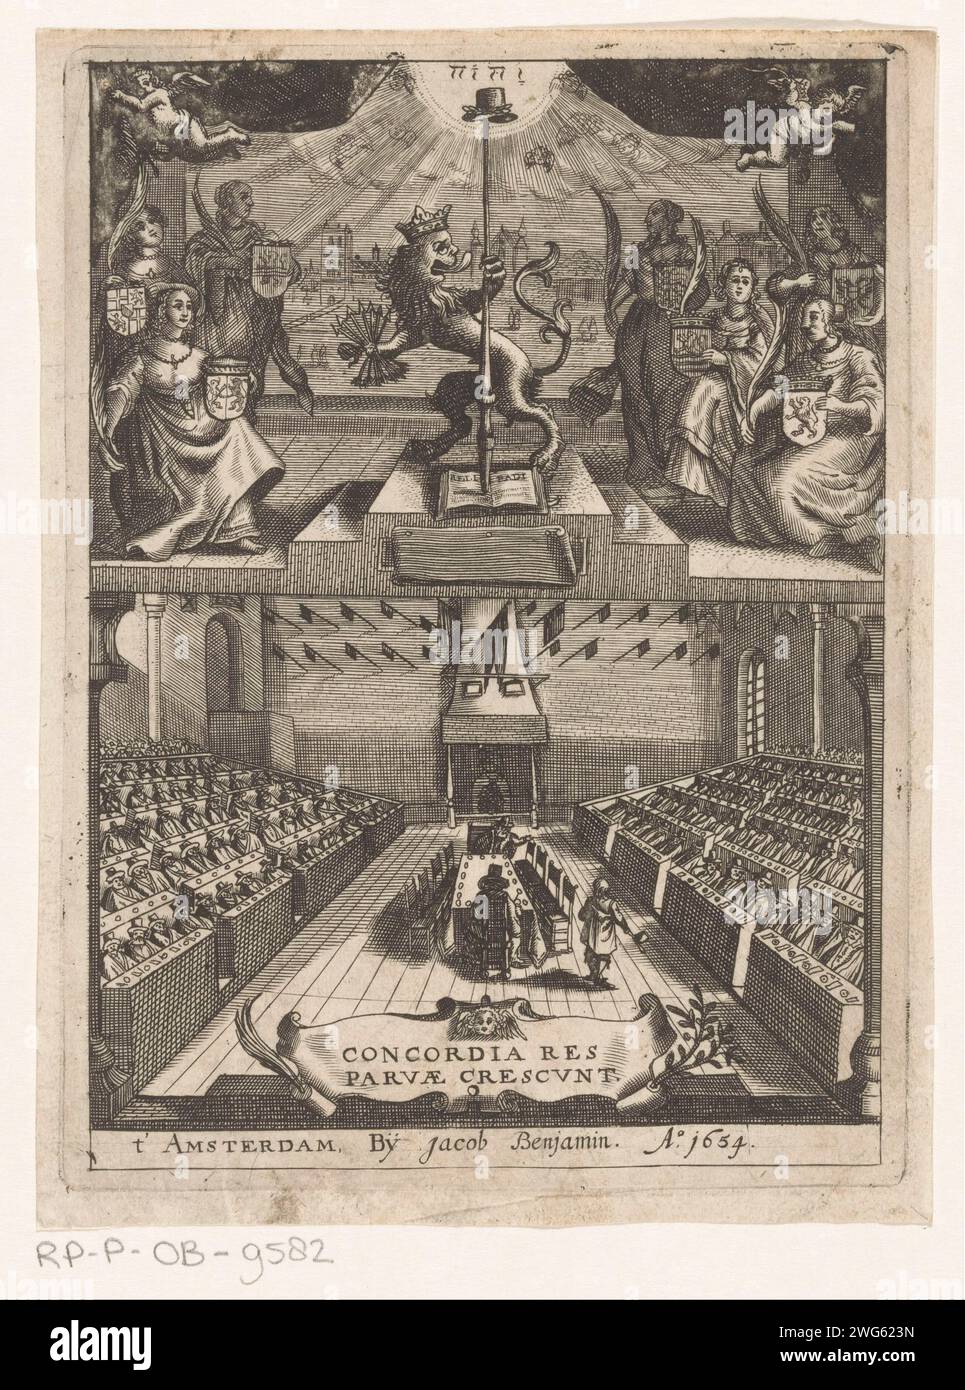 Dutch Lion and Republic of the Seven United Netherlands, Anonymous, 1654 print The Hollandse Leeuw with freedom hat and a bundle of seven arrows. Around seven women with coats of arms are as personifications of the seven states of the Republic of the United Netherlands. Below the room where the Union of Utrecht was closed. Amsterdam paper engraving / etching beasts of prey, predatory animals: lion. symbols of particular nations, states, districts, etc.. alliance, league, union, foedus Stock Photo